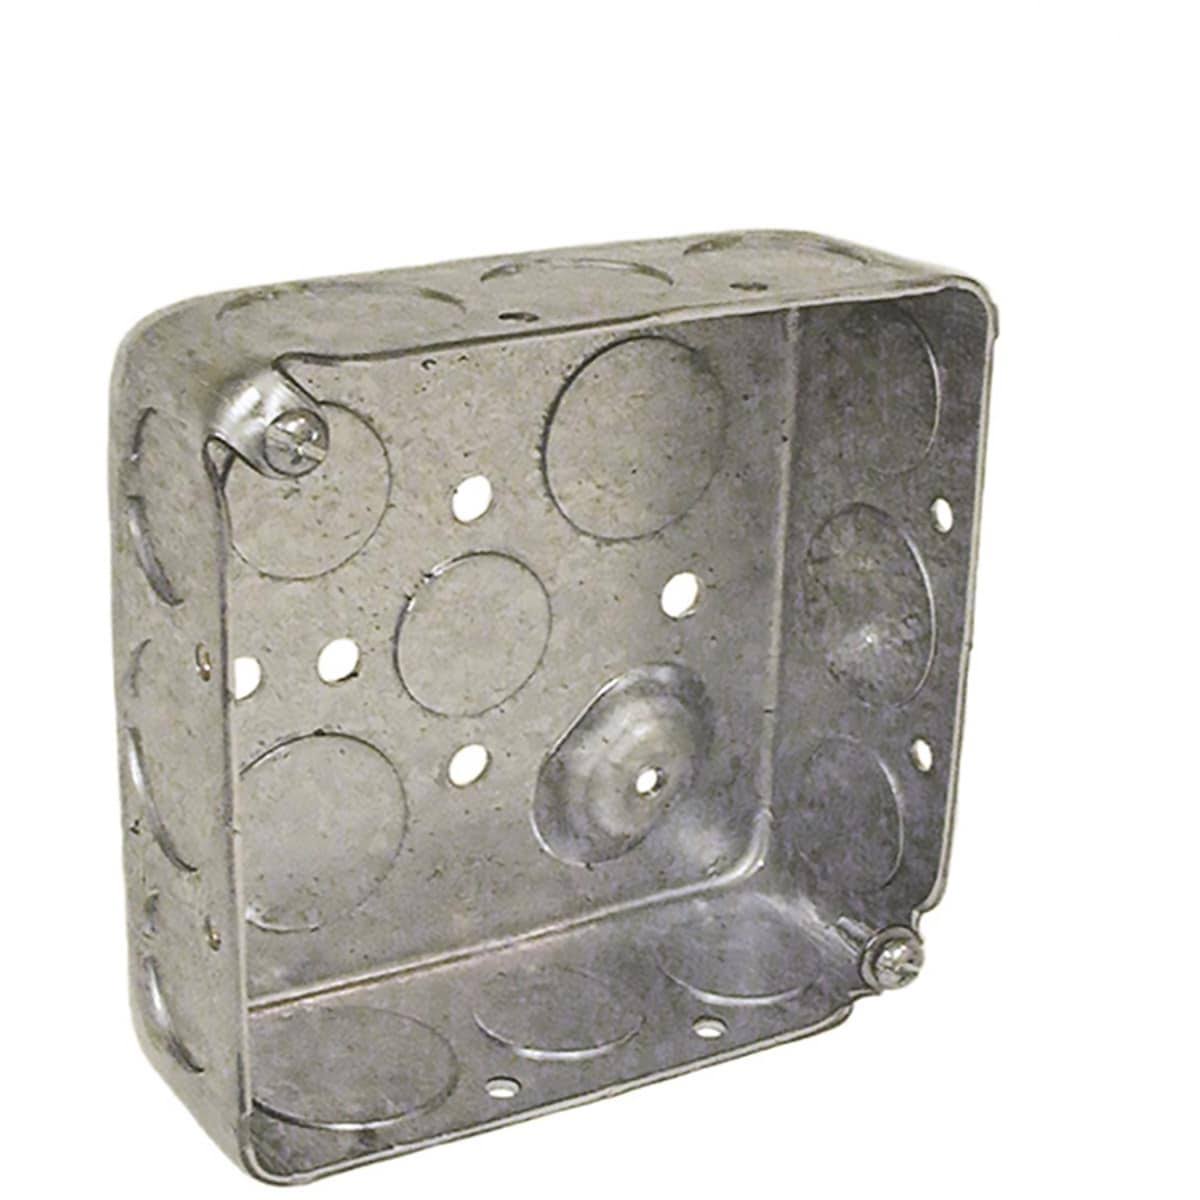 Raco Drawn Steel Outlet Box - with 12 Side and 5 Bottom Knockouts